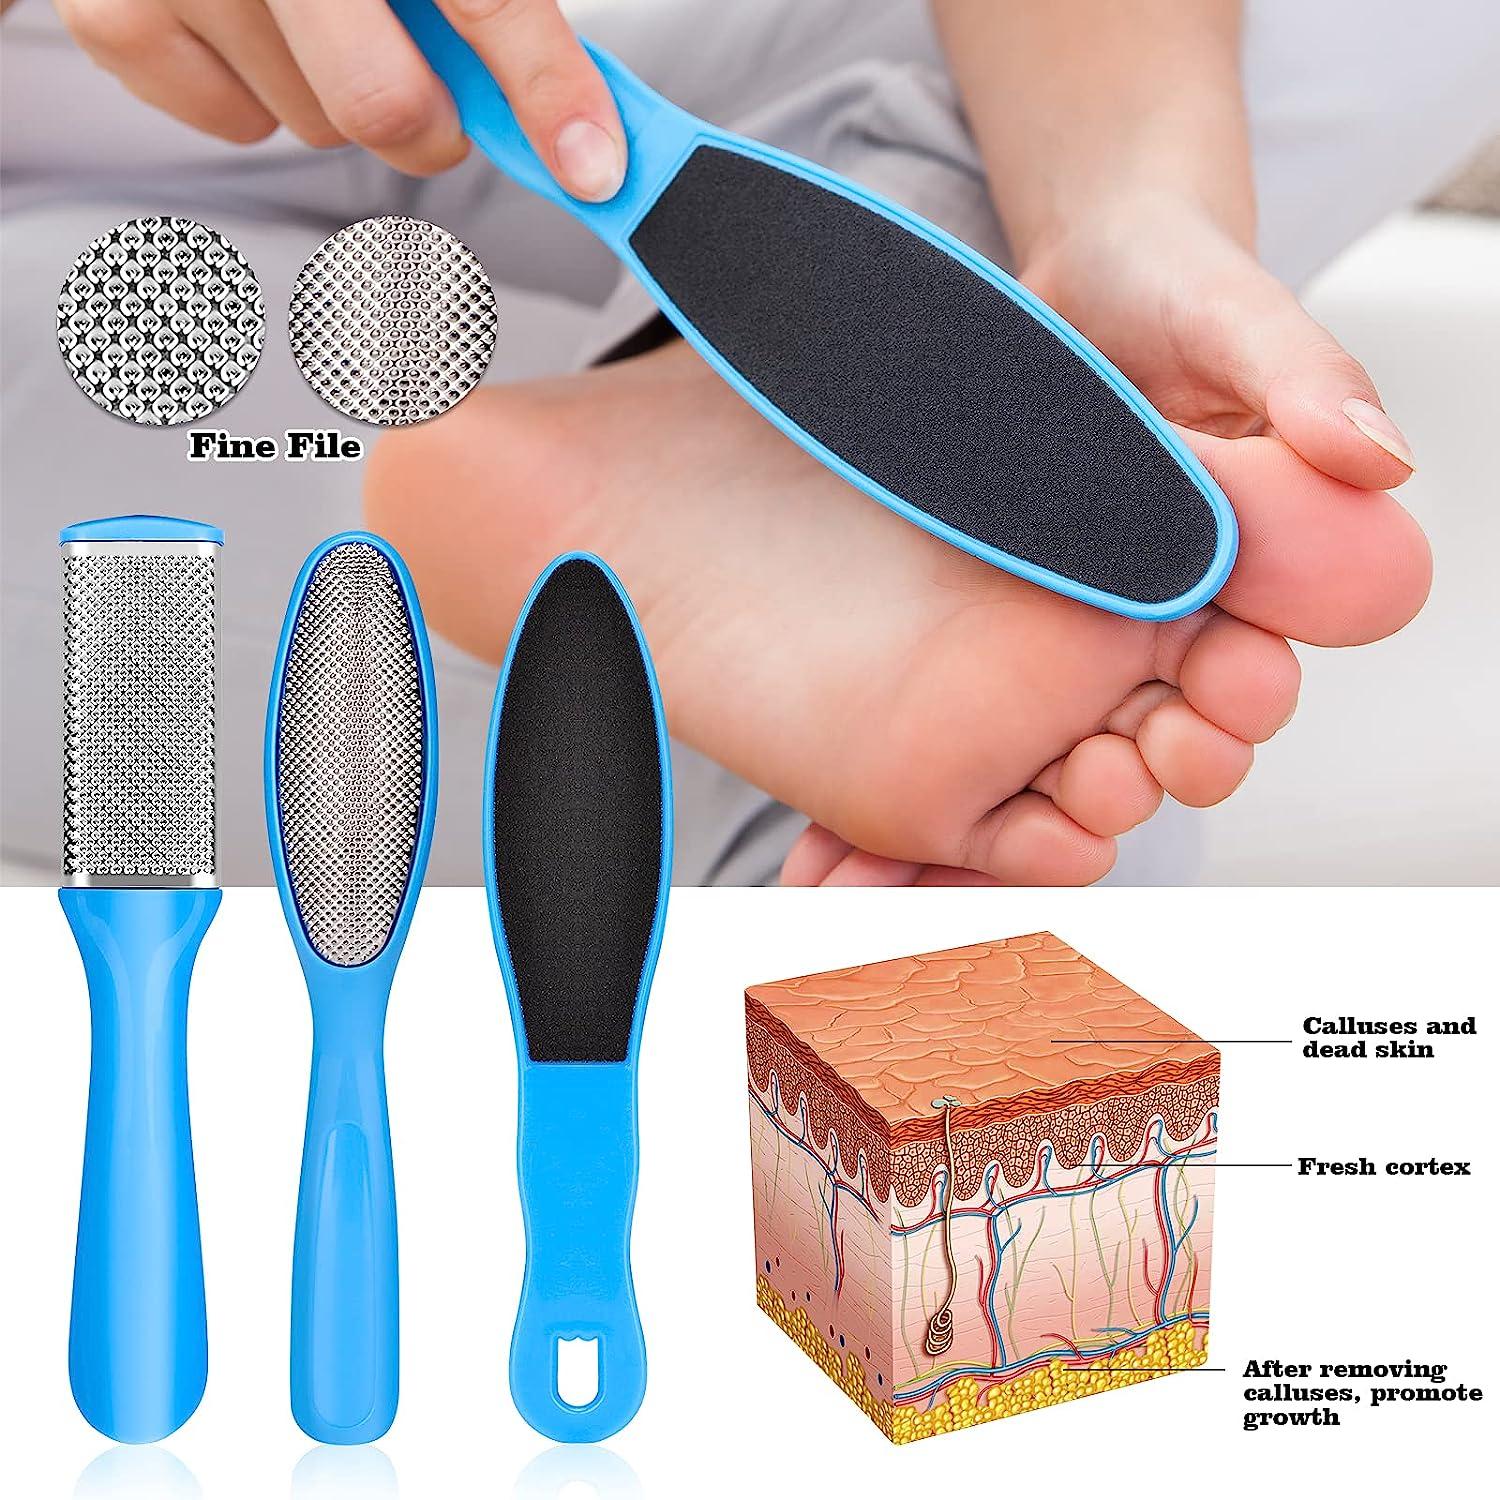 Pedicure Kits - Callus Remover for Feet, 23 in 1 Professional